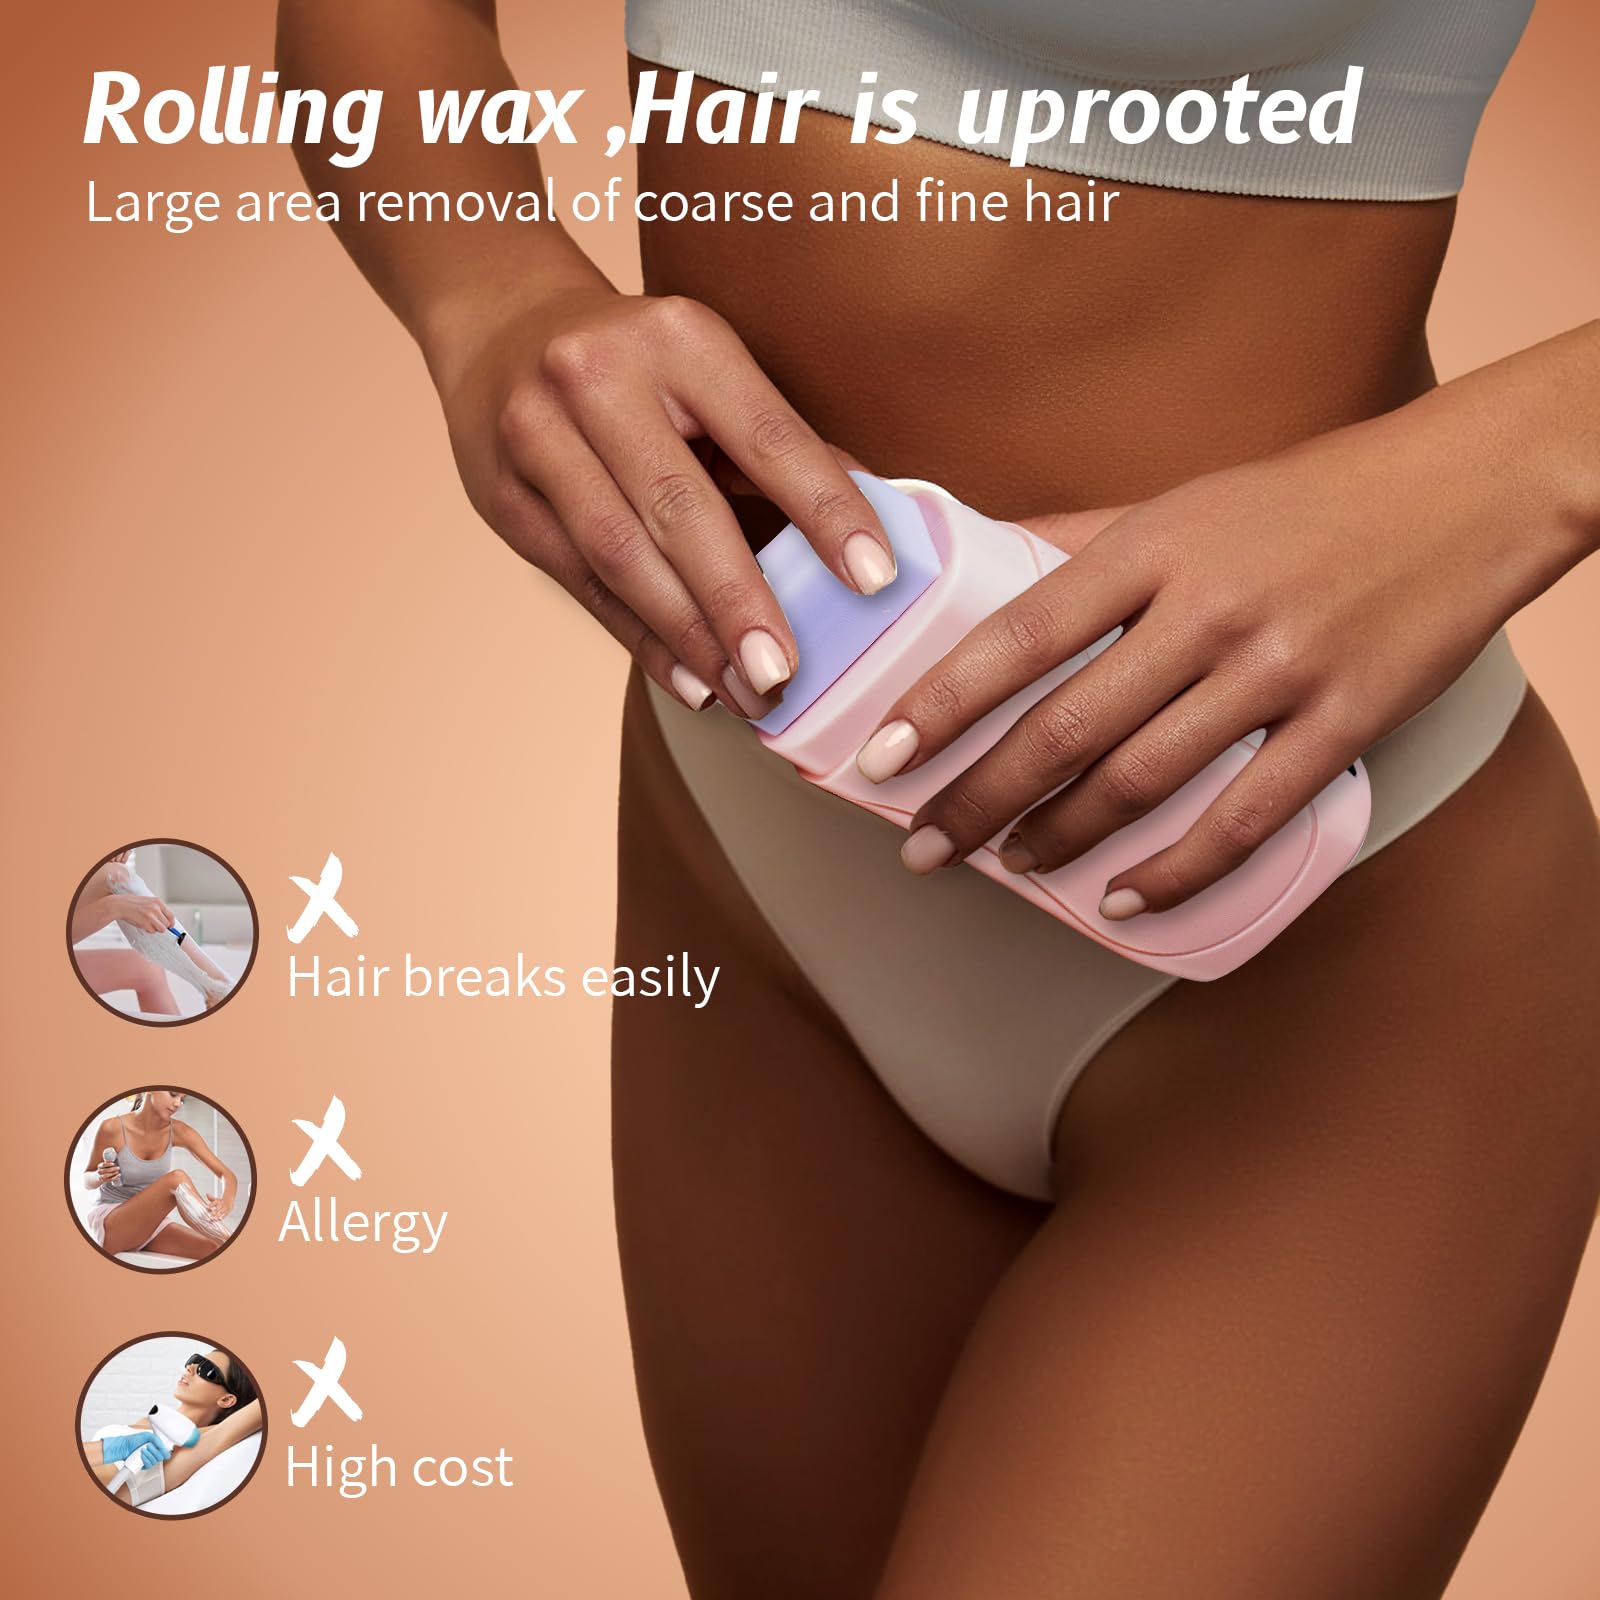 waxup Roller Waxing Kit for Women, Honey Roll on Wax Kit for Hair Removal.  1 Roll on Wax Warmer, 25 Non Woven Waxing Strips, 2 Roll on Wax Cartridge  Refill, 1 Almond Oil Wax Remover.